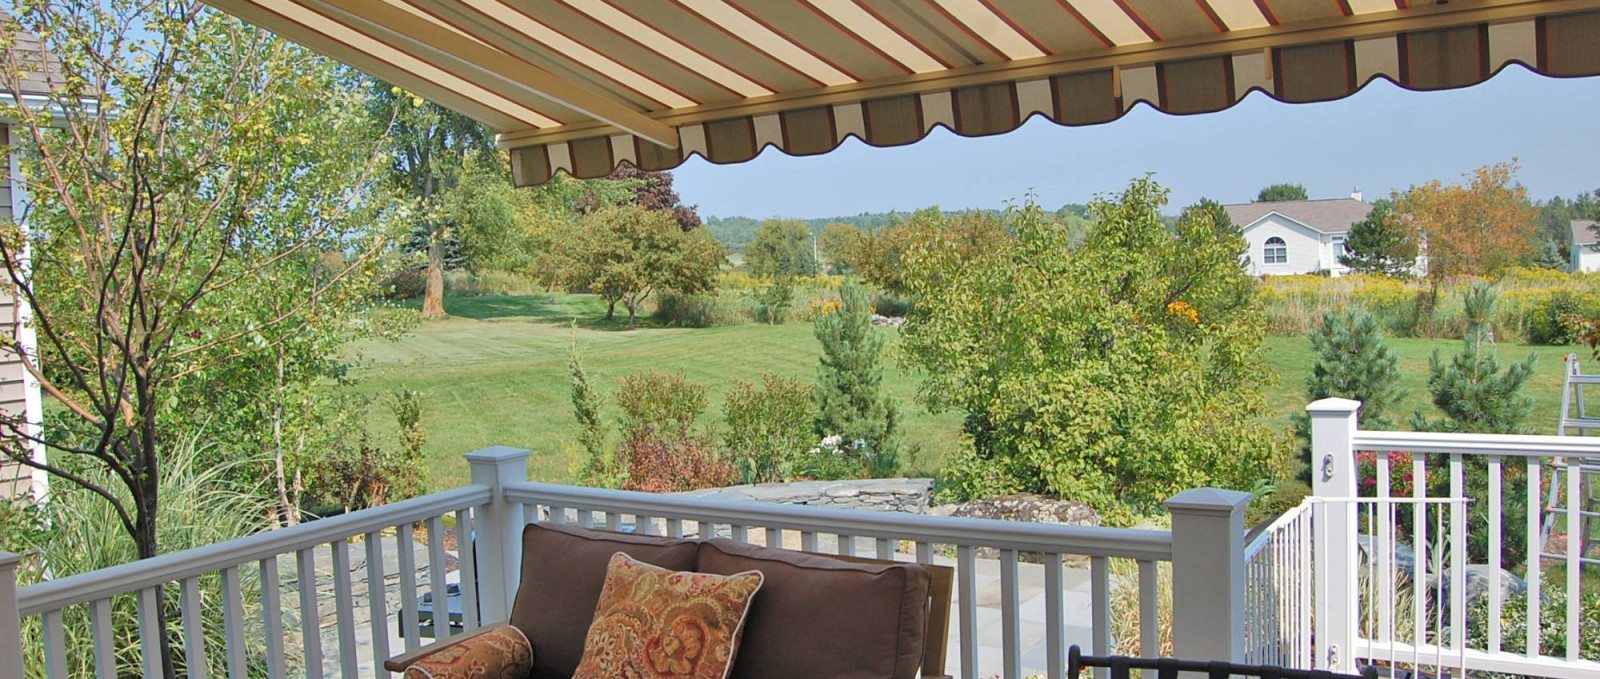 Retractable patio awning view